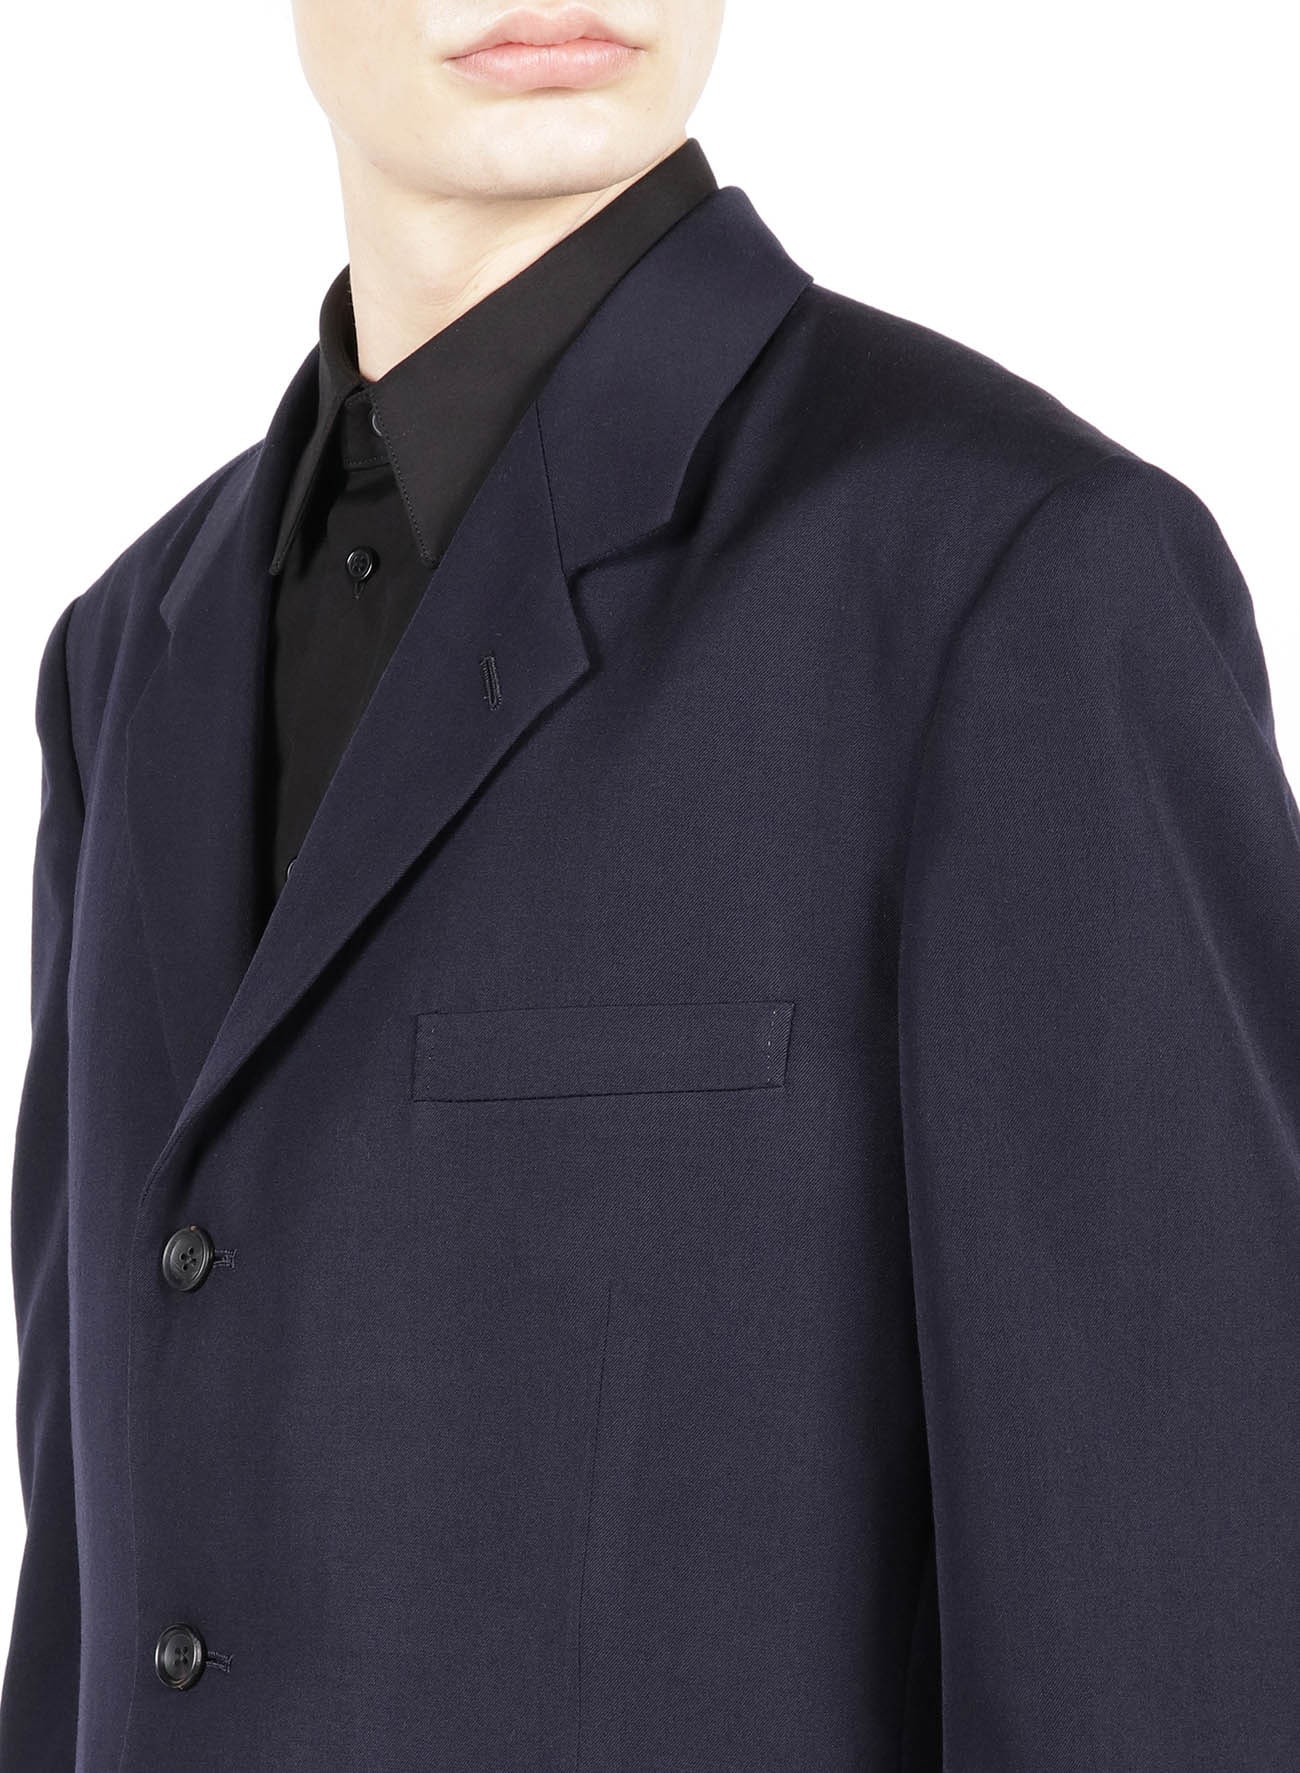 COSTUME D’HOMME GABARDINE 3-BUTTON SINGLE BREASTED JACKET